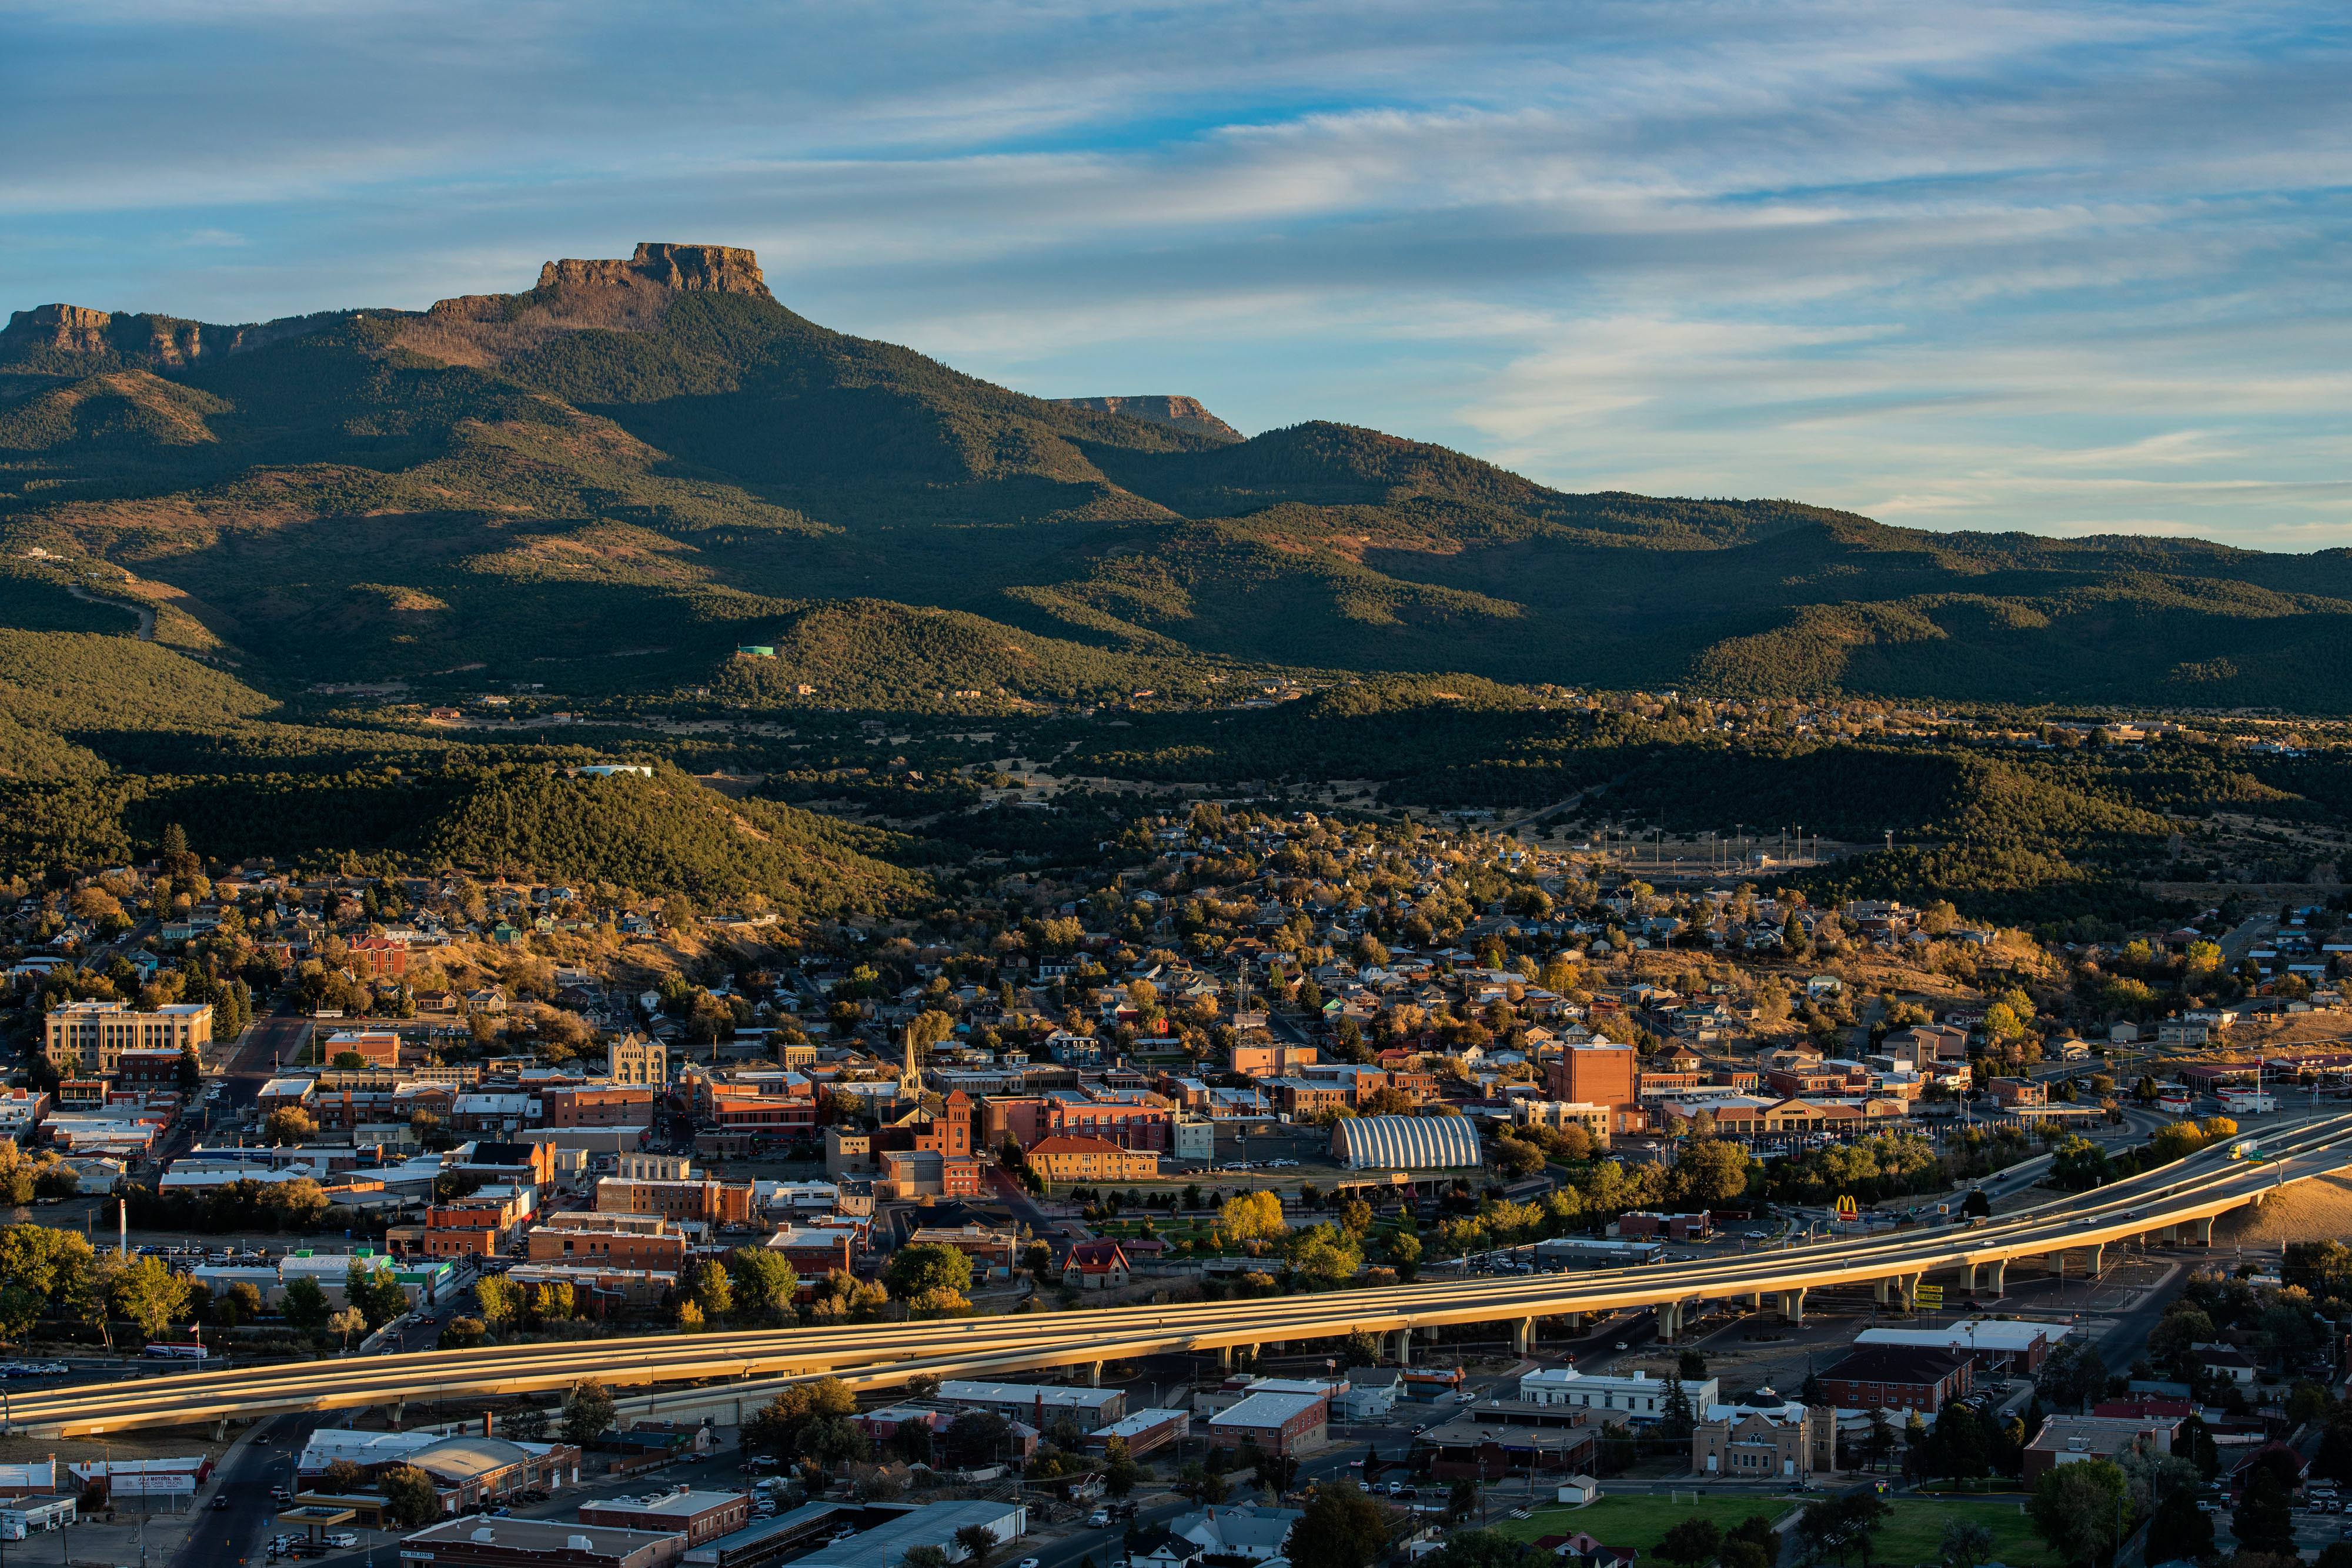 Fishers Peak forms a backdrop to the town of Trinidad, Colorado